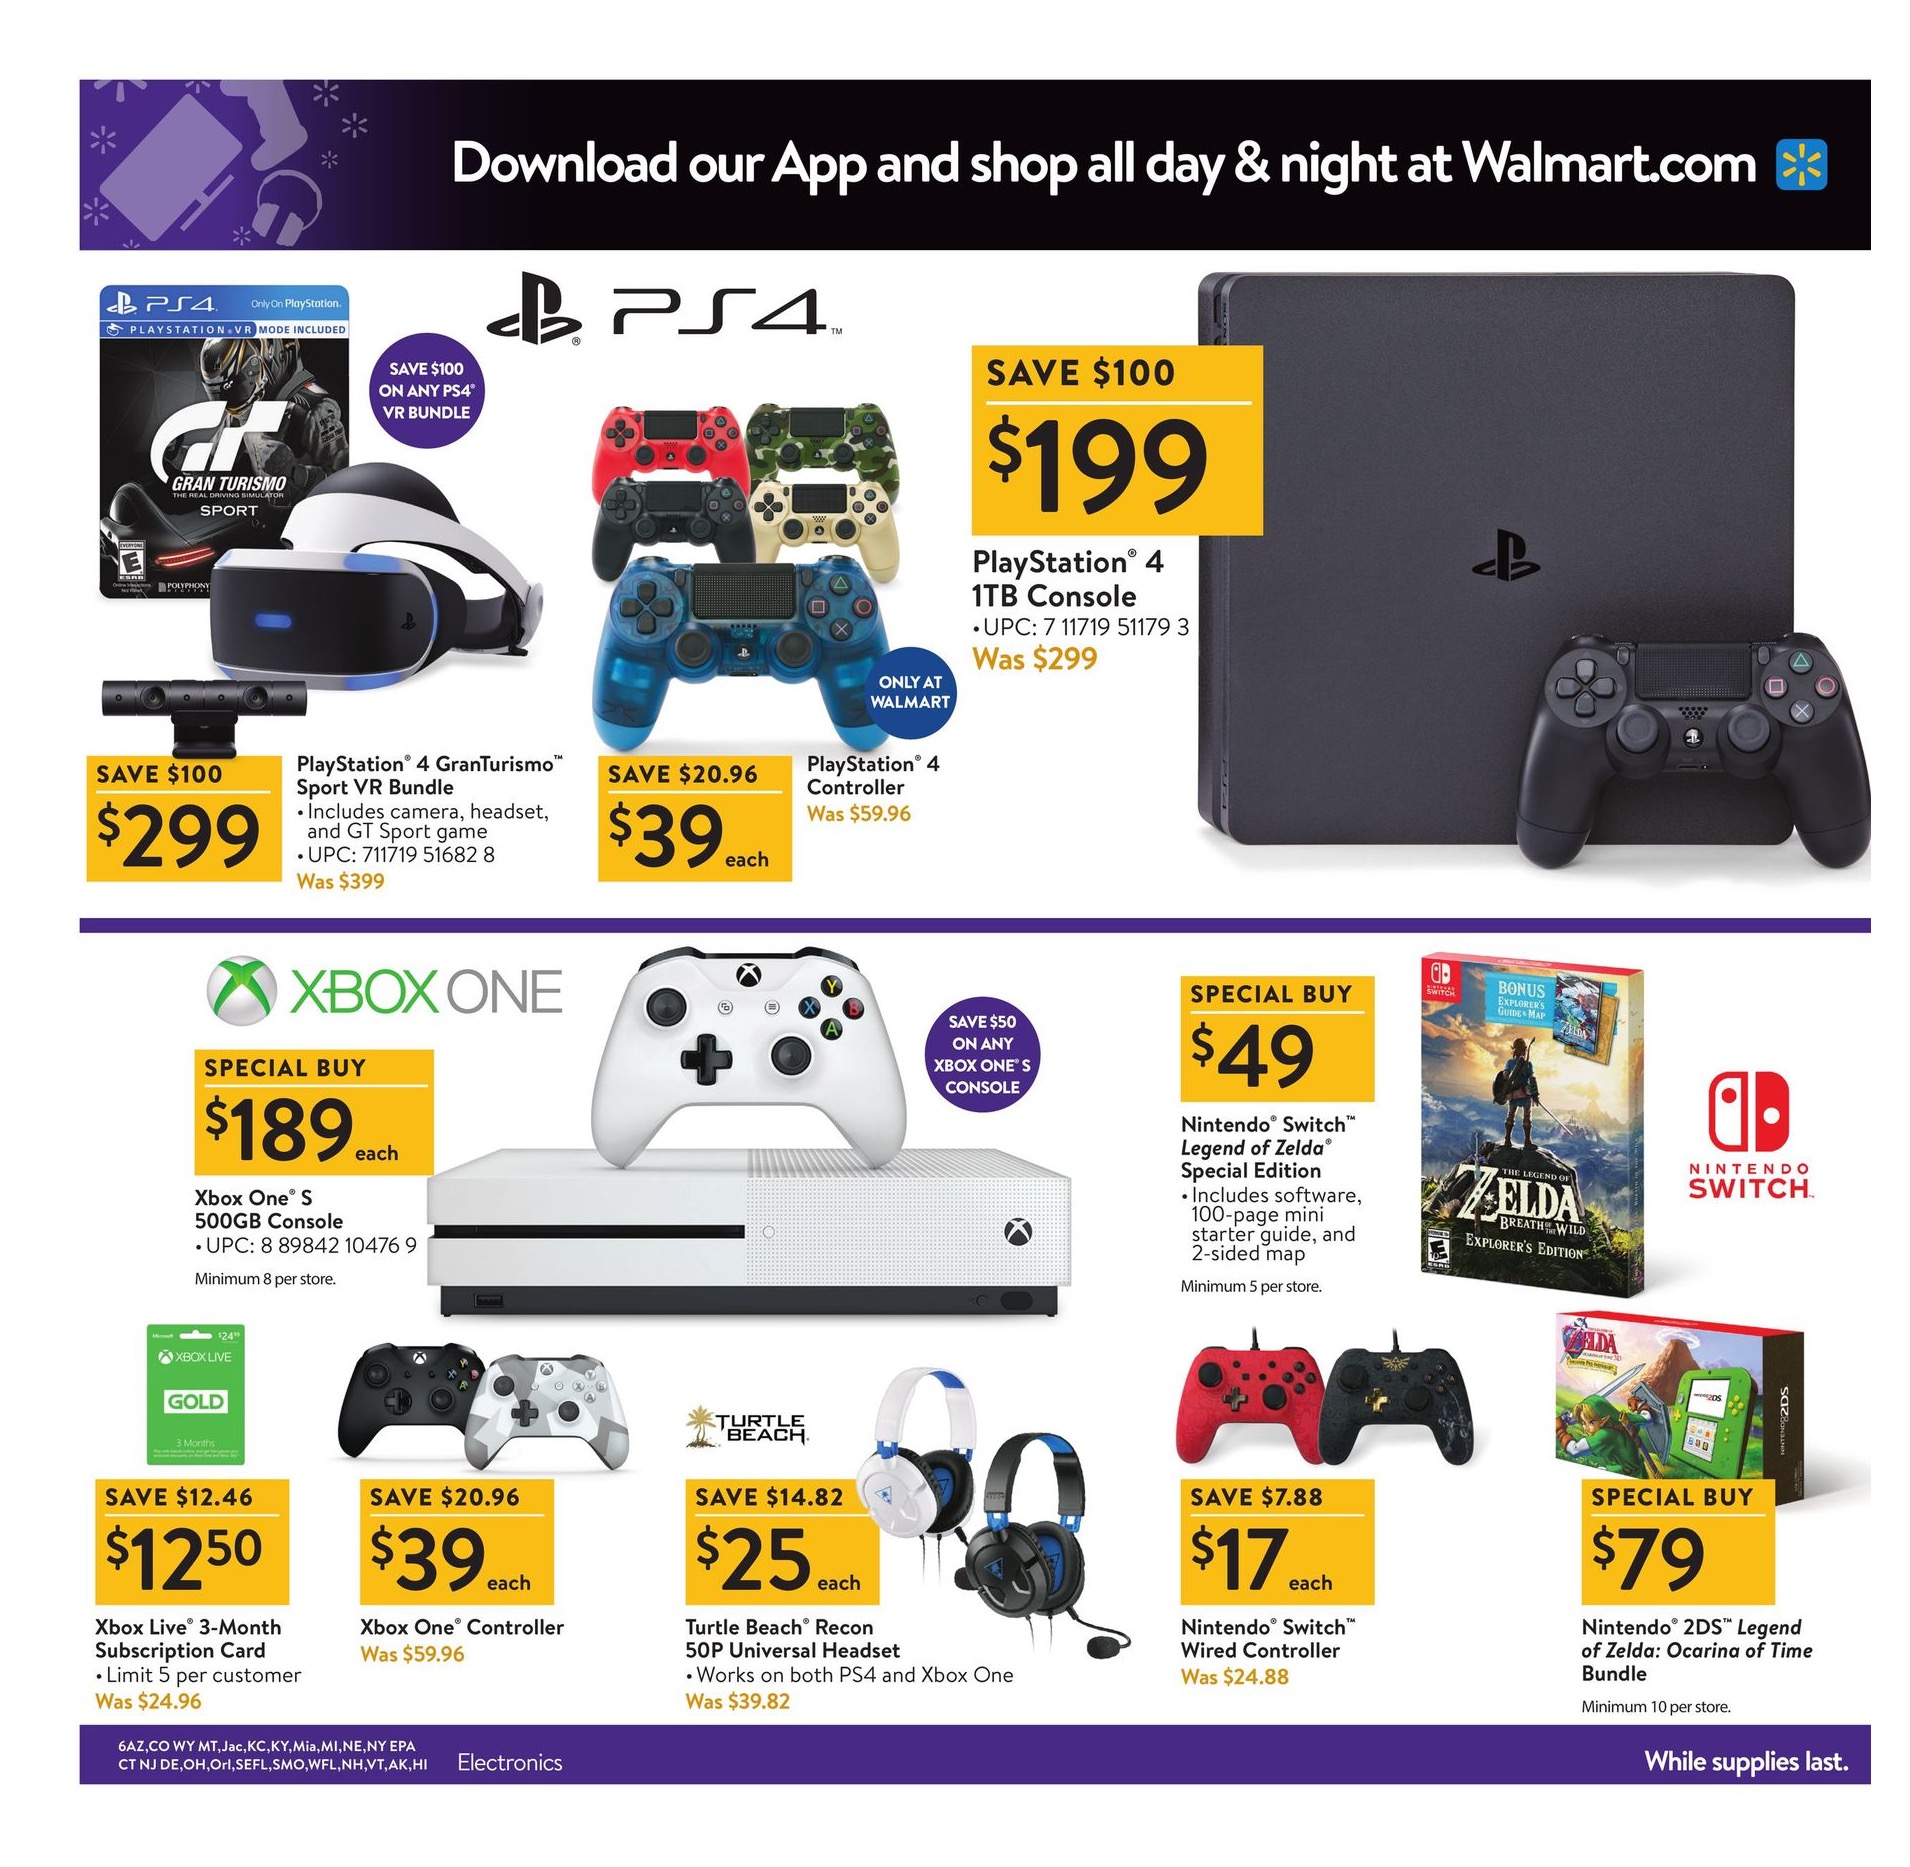 Here’s the full 36-page Black Friday 2017 ad from Walmart – BGR